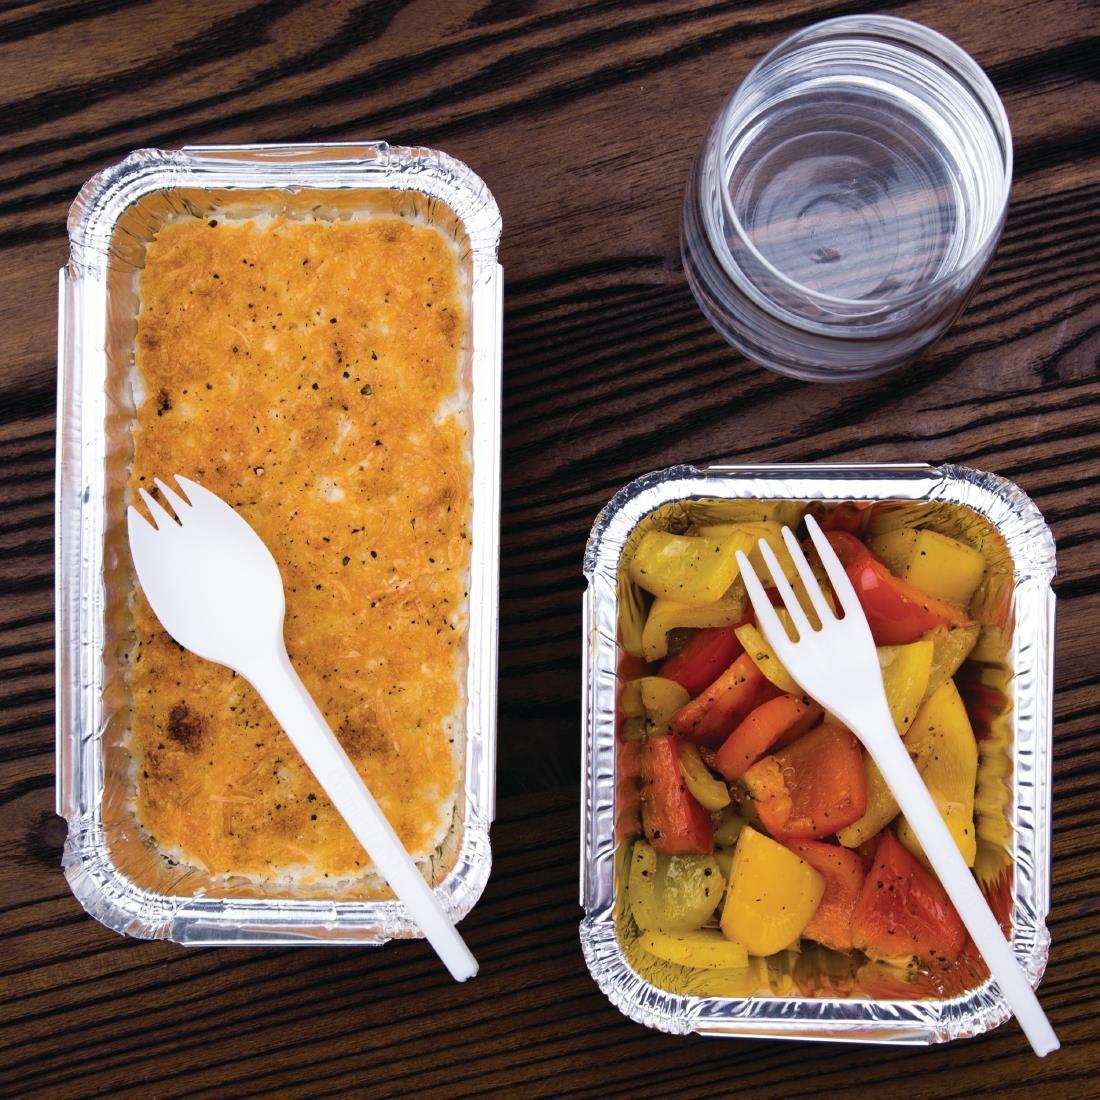 Fiesta Recyclable Foil Containers Large 688ml / 24oz (Pack of 500) - CD951  - Buy Online at Nisbets